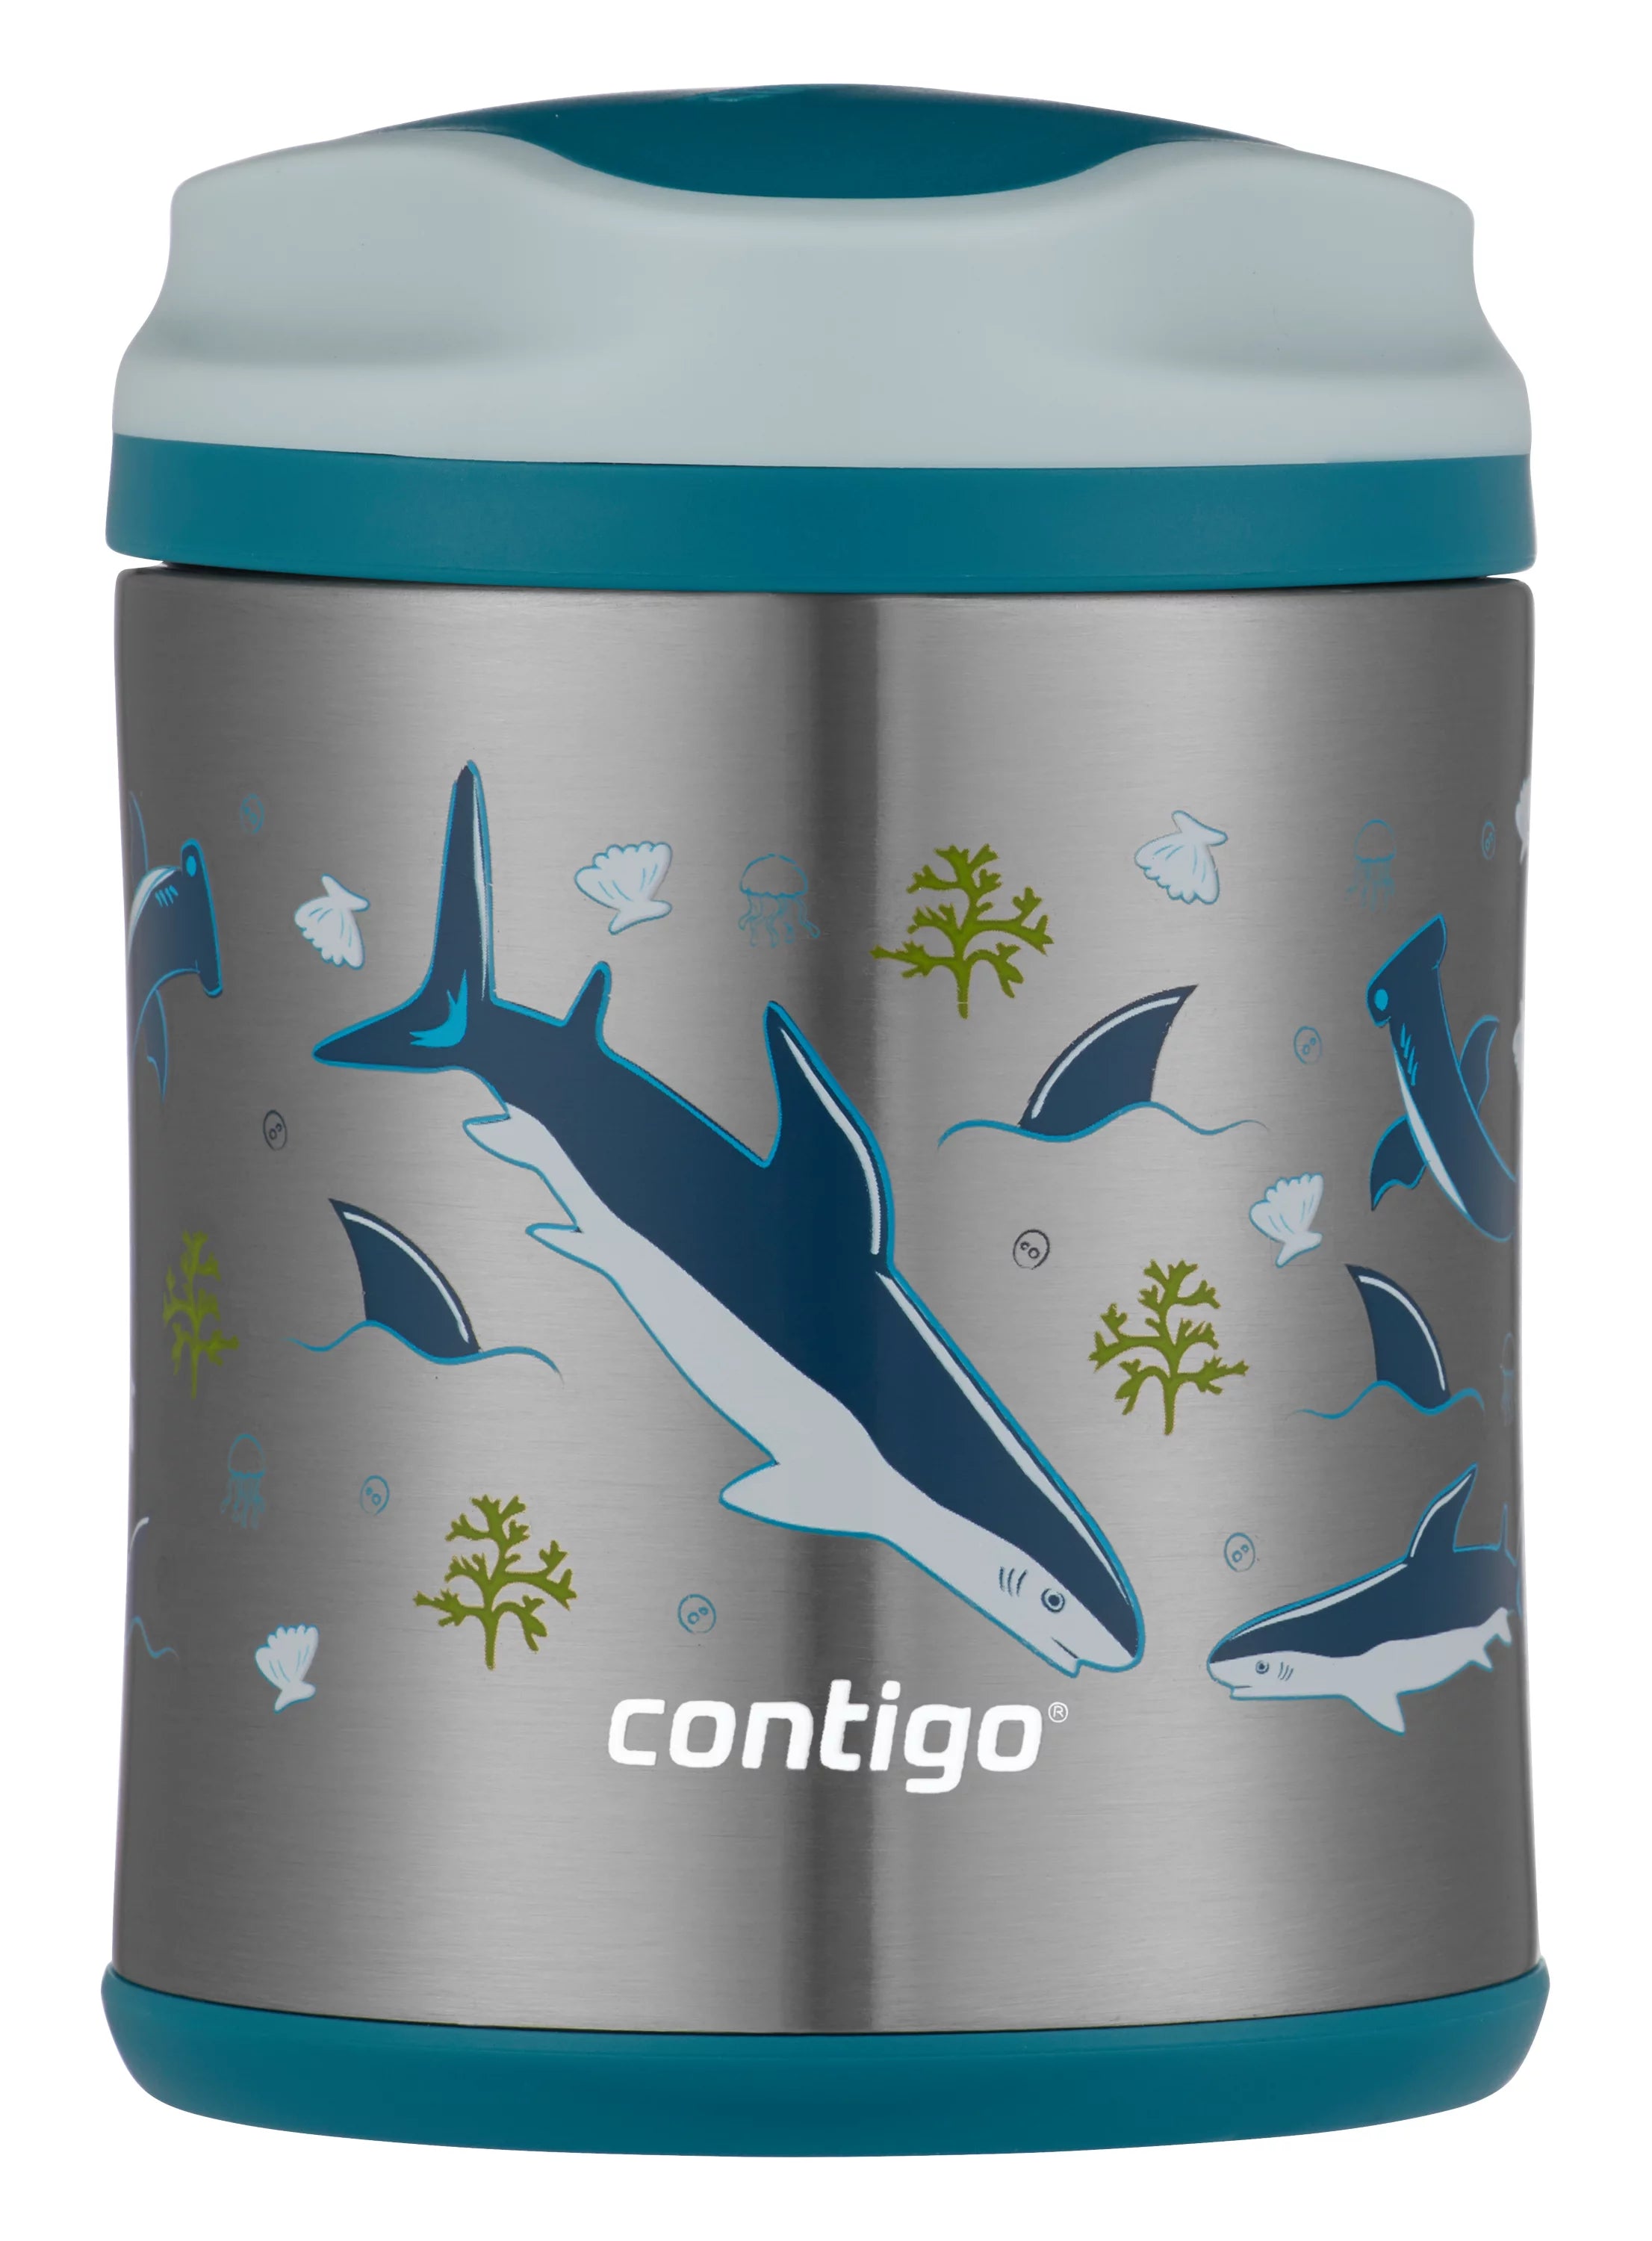 Contigo Food Jar Stainless Steel Vacuum Insulated Container 100 Percent Leak Proof Kids Lunch Box